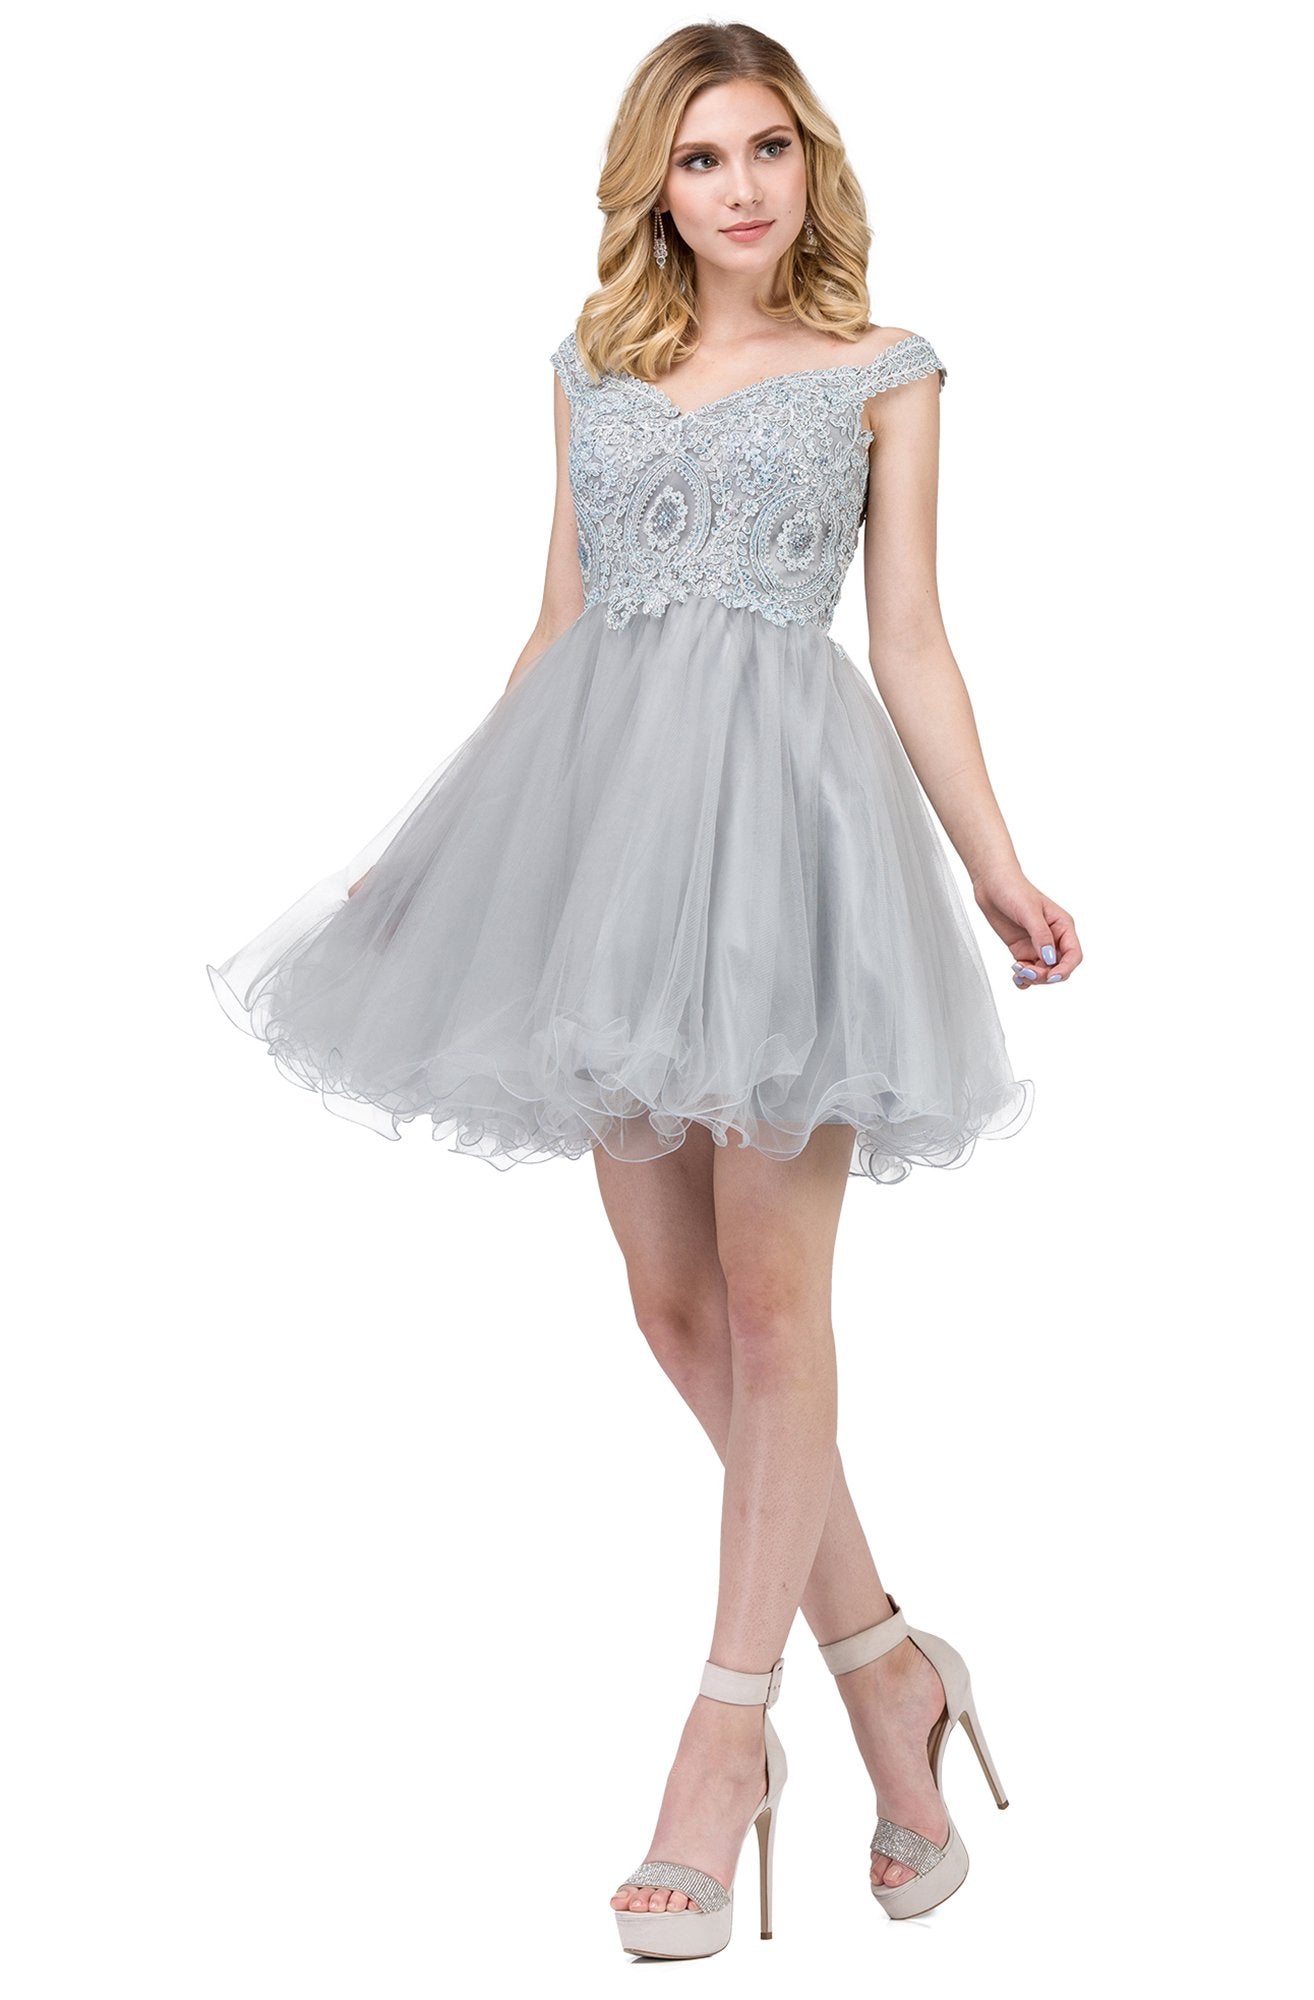 Dancing Queen - 3070 Beaded Lace Fit And Flare Cocktail Dress In Silver